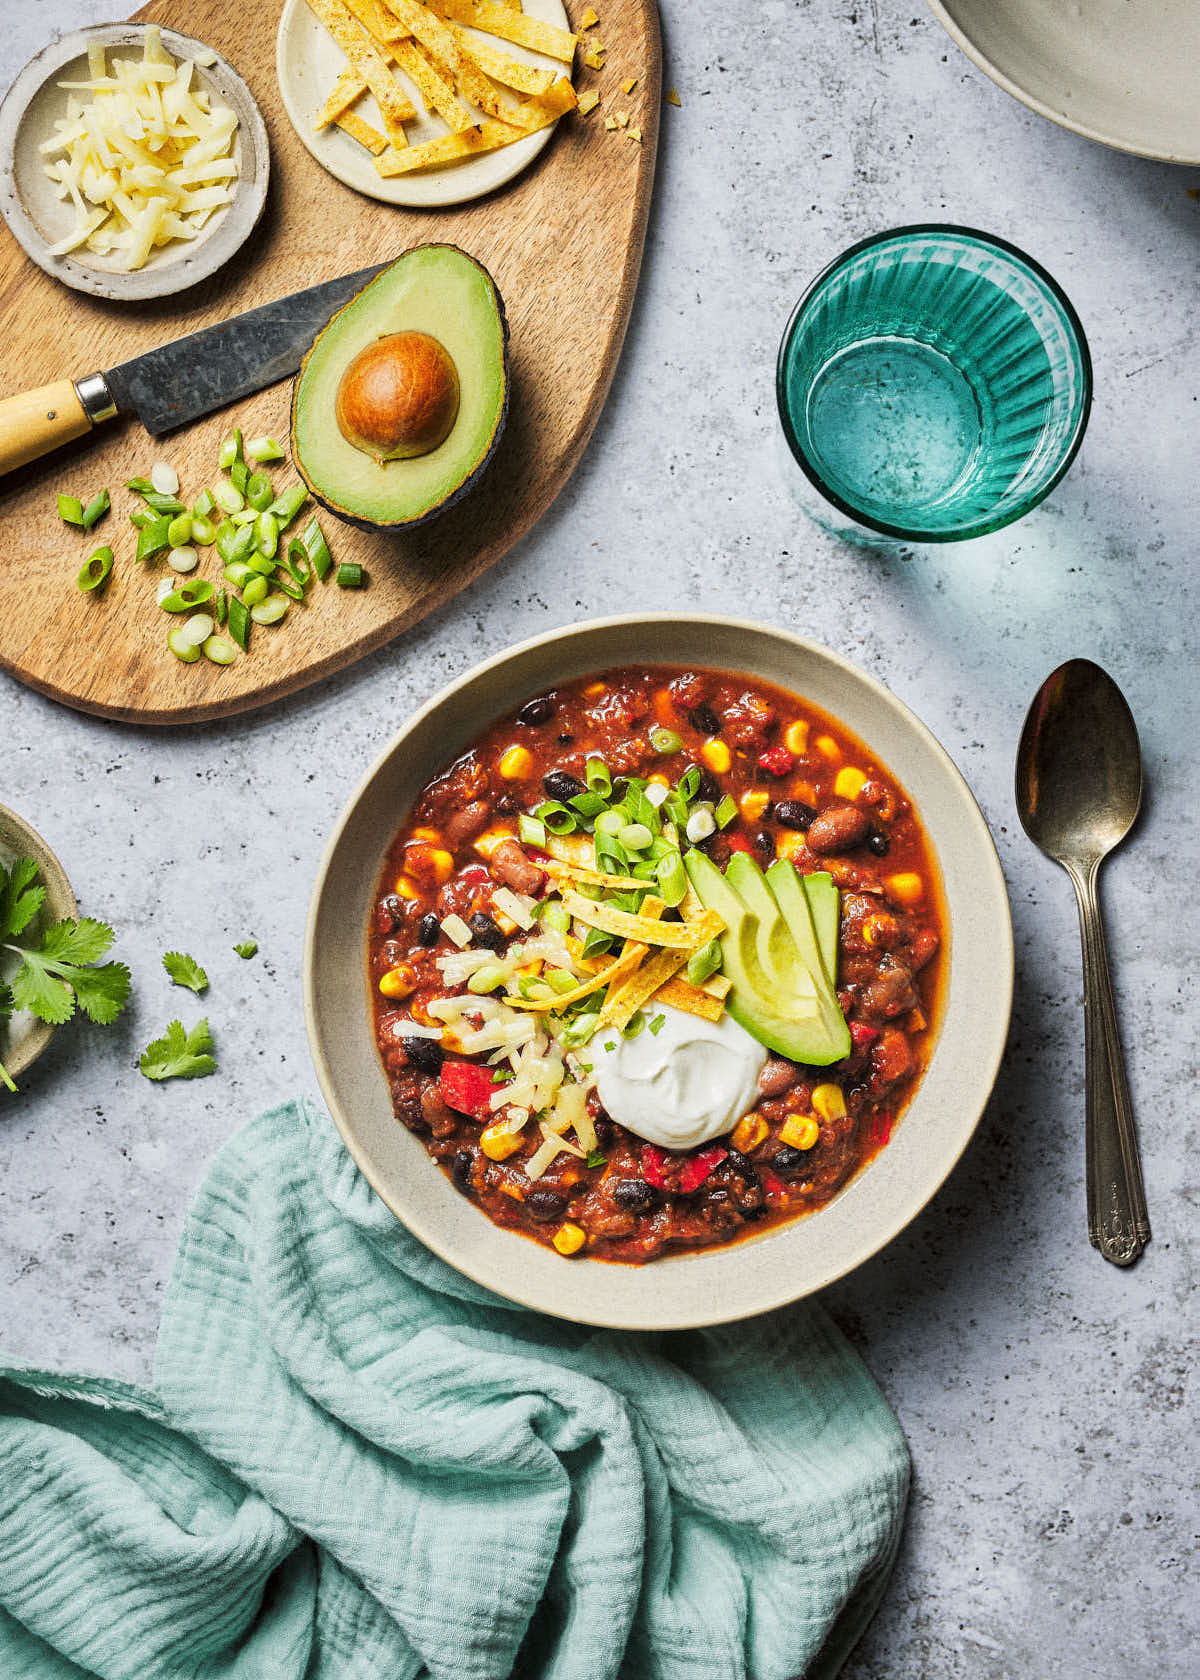 Bowl of veggie chili with toppings on cutting board above